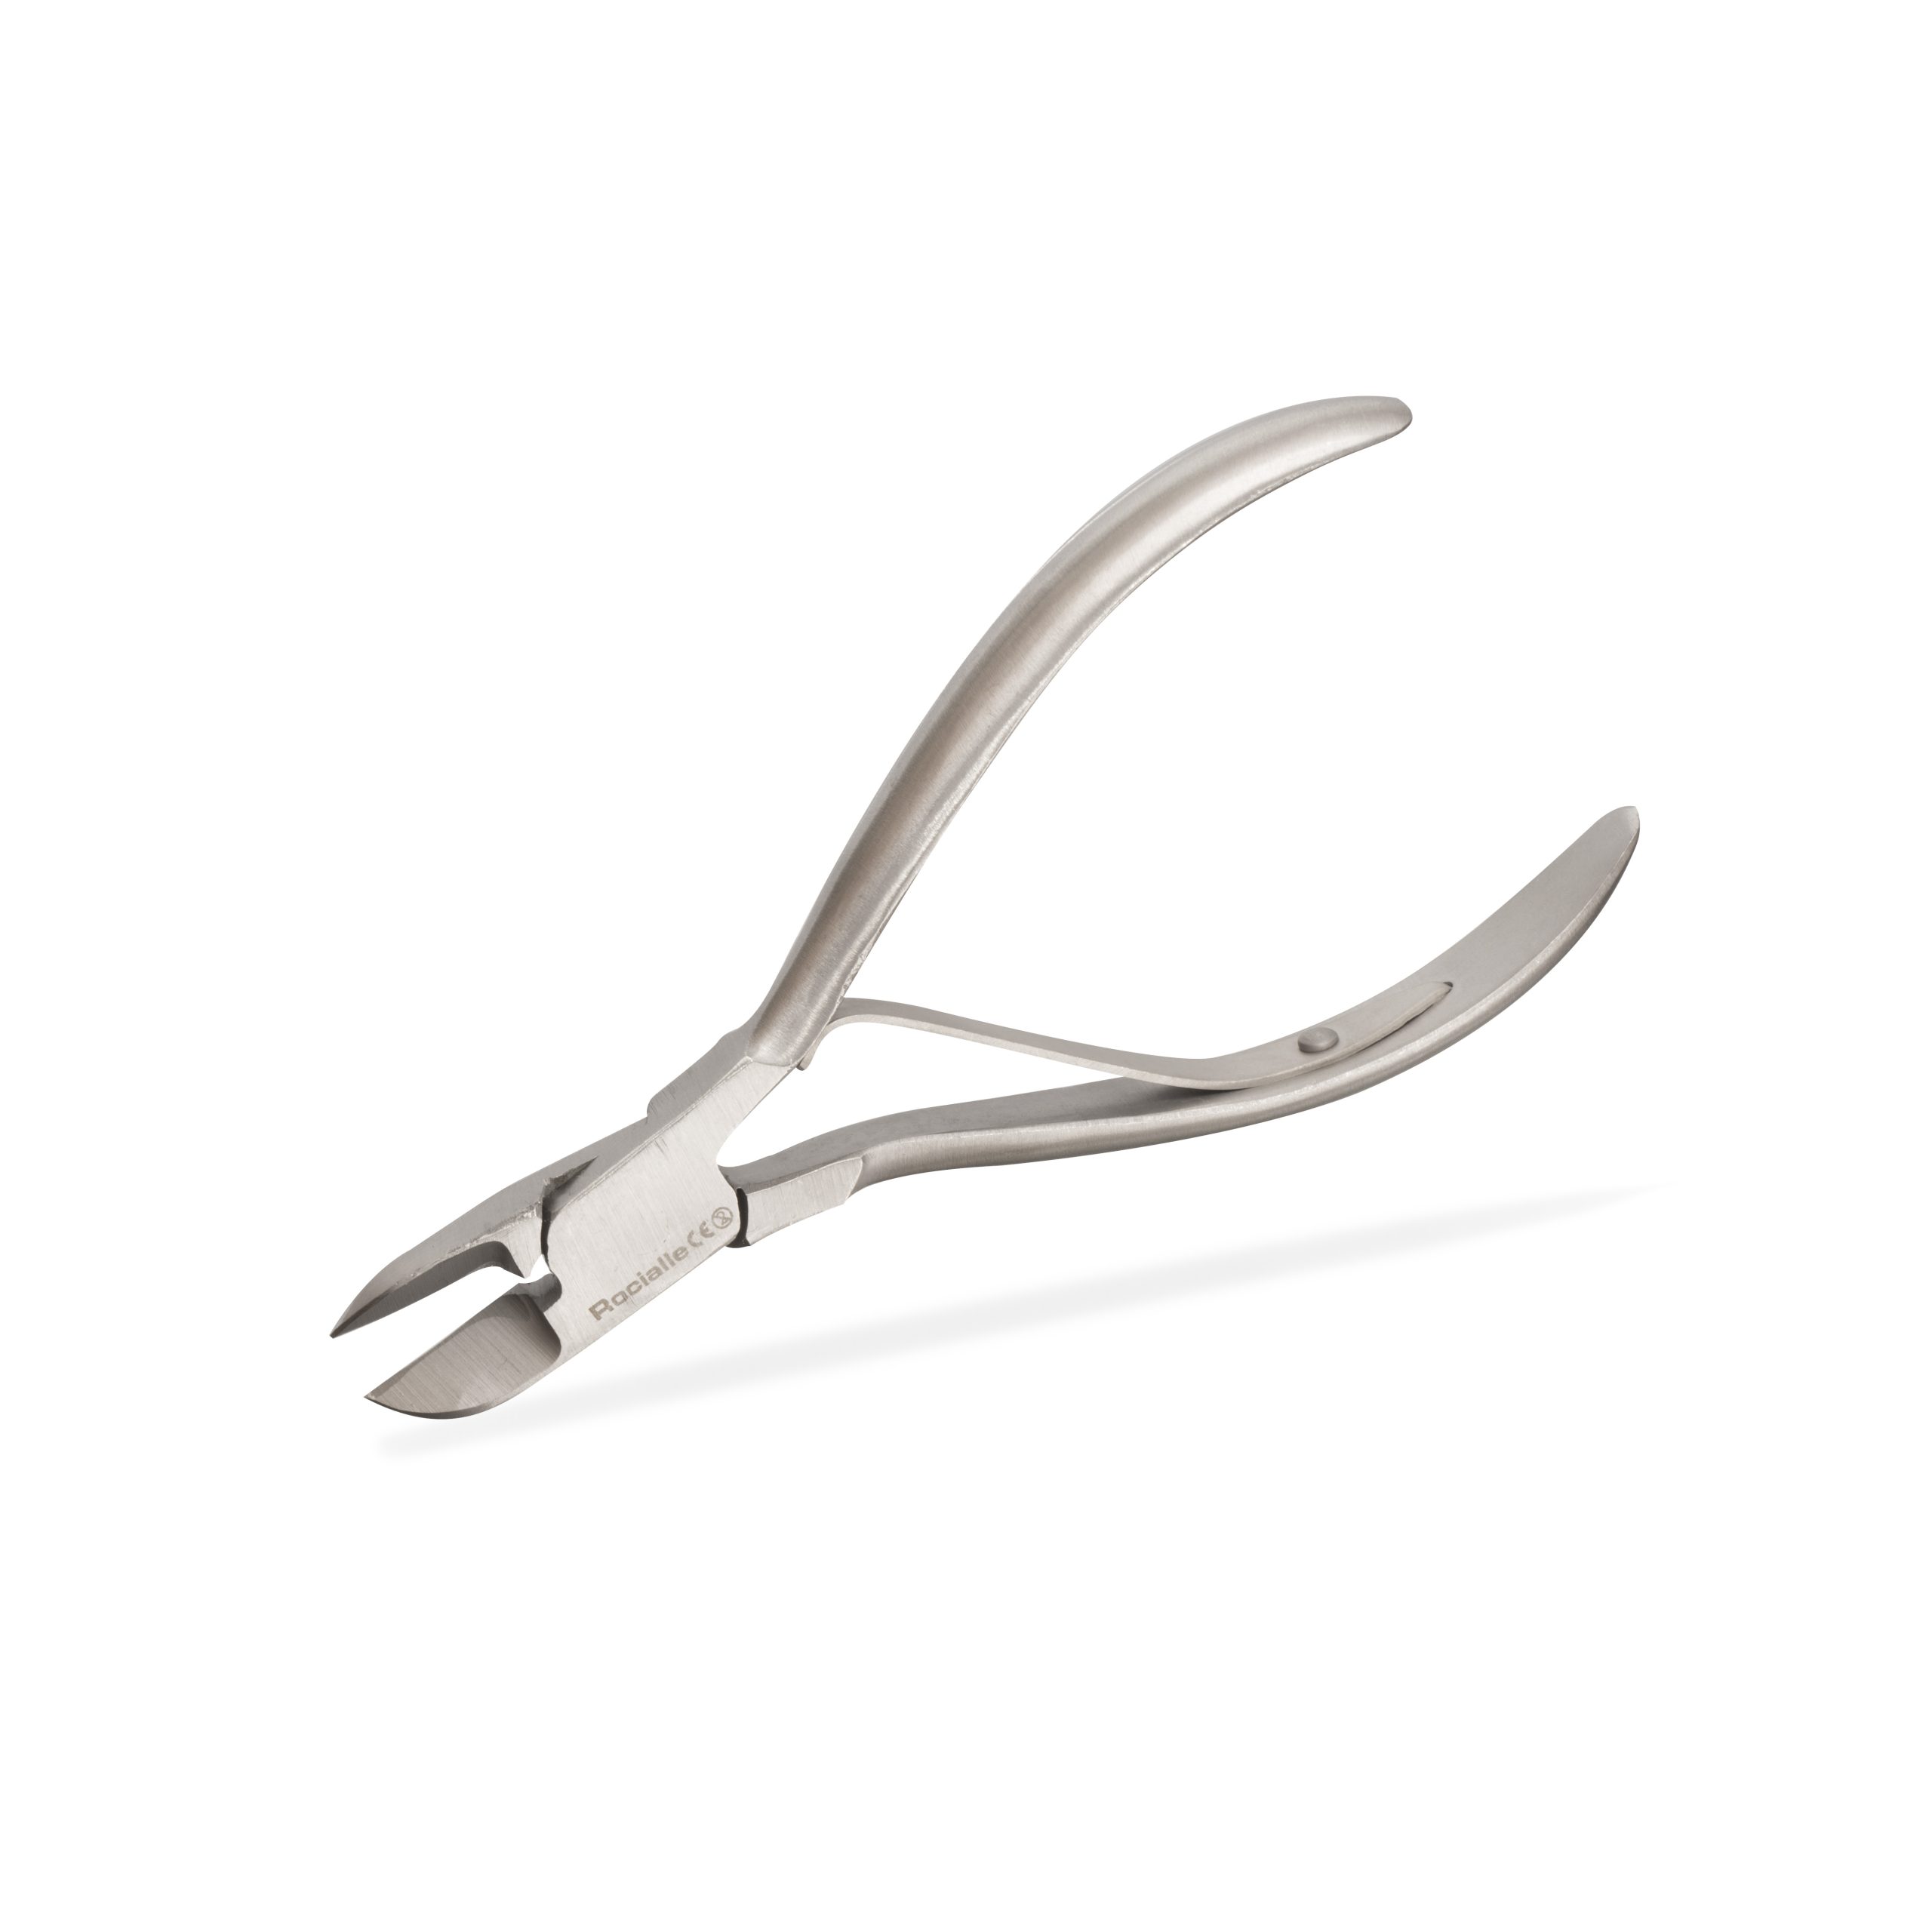 Double Action Nail Nippers - 323-01 - Bioseal Inc